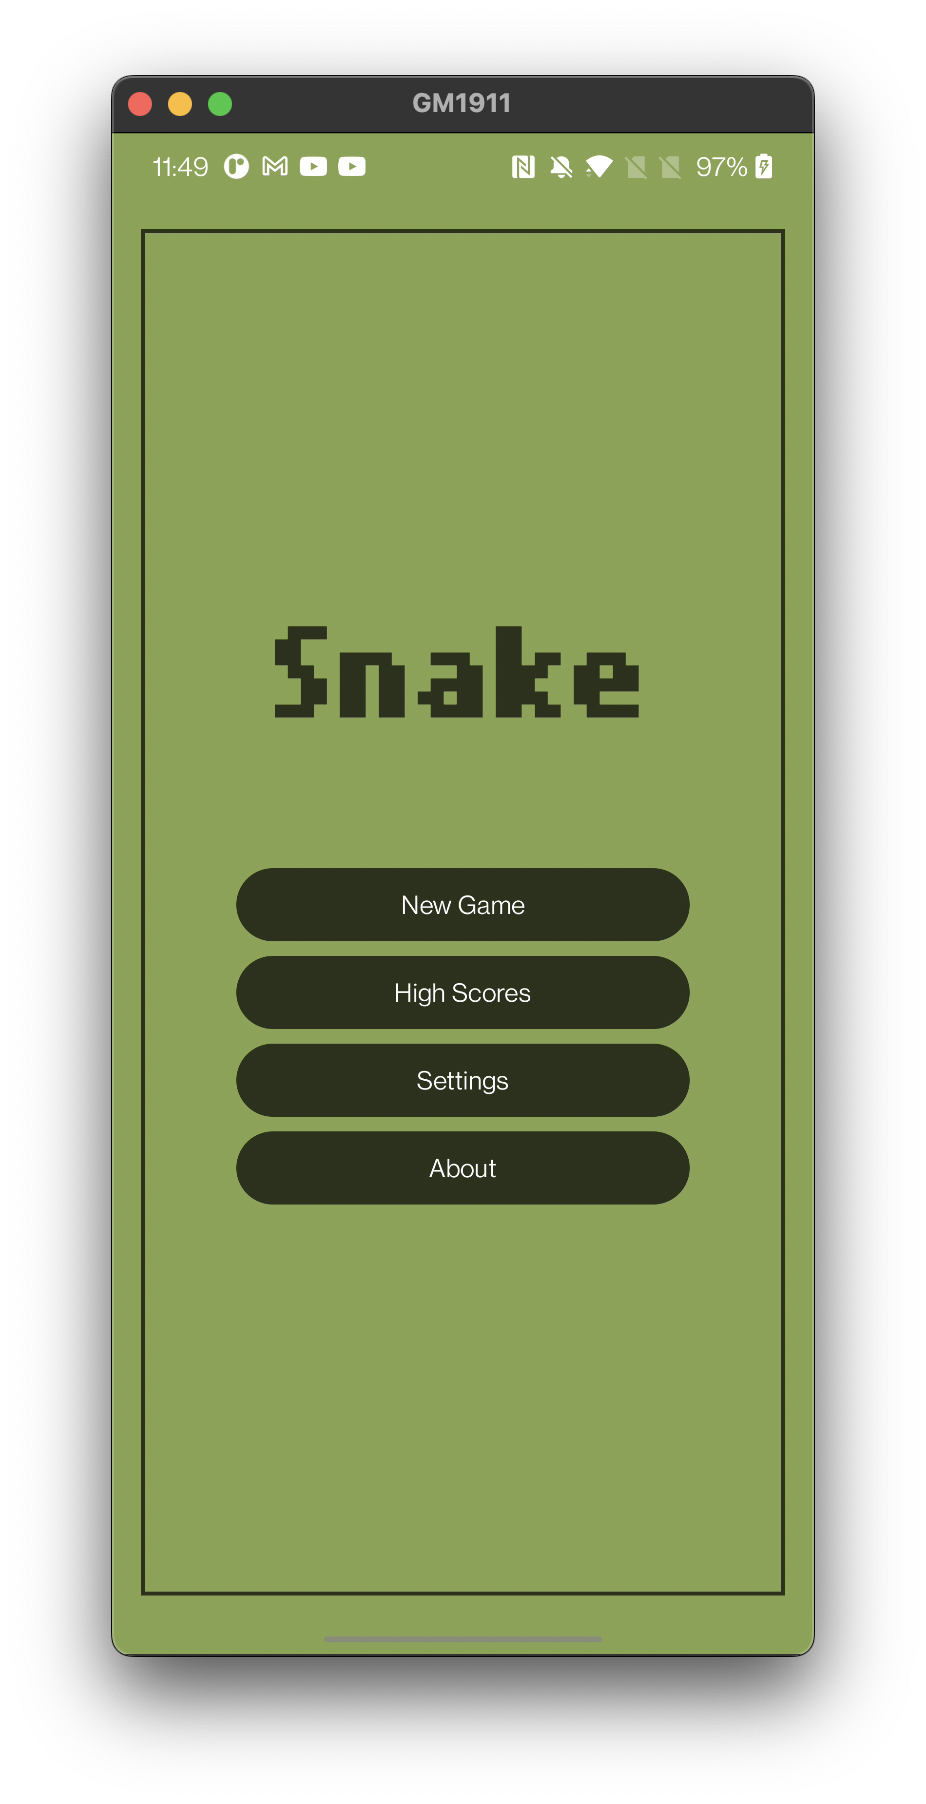 android_snake_game/README.md at master · codepath/android_snake_game ·  GitHub